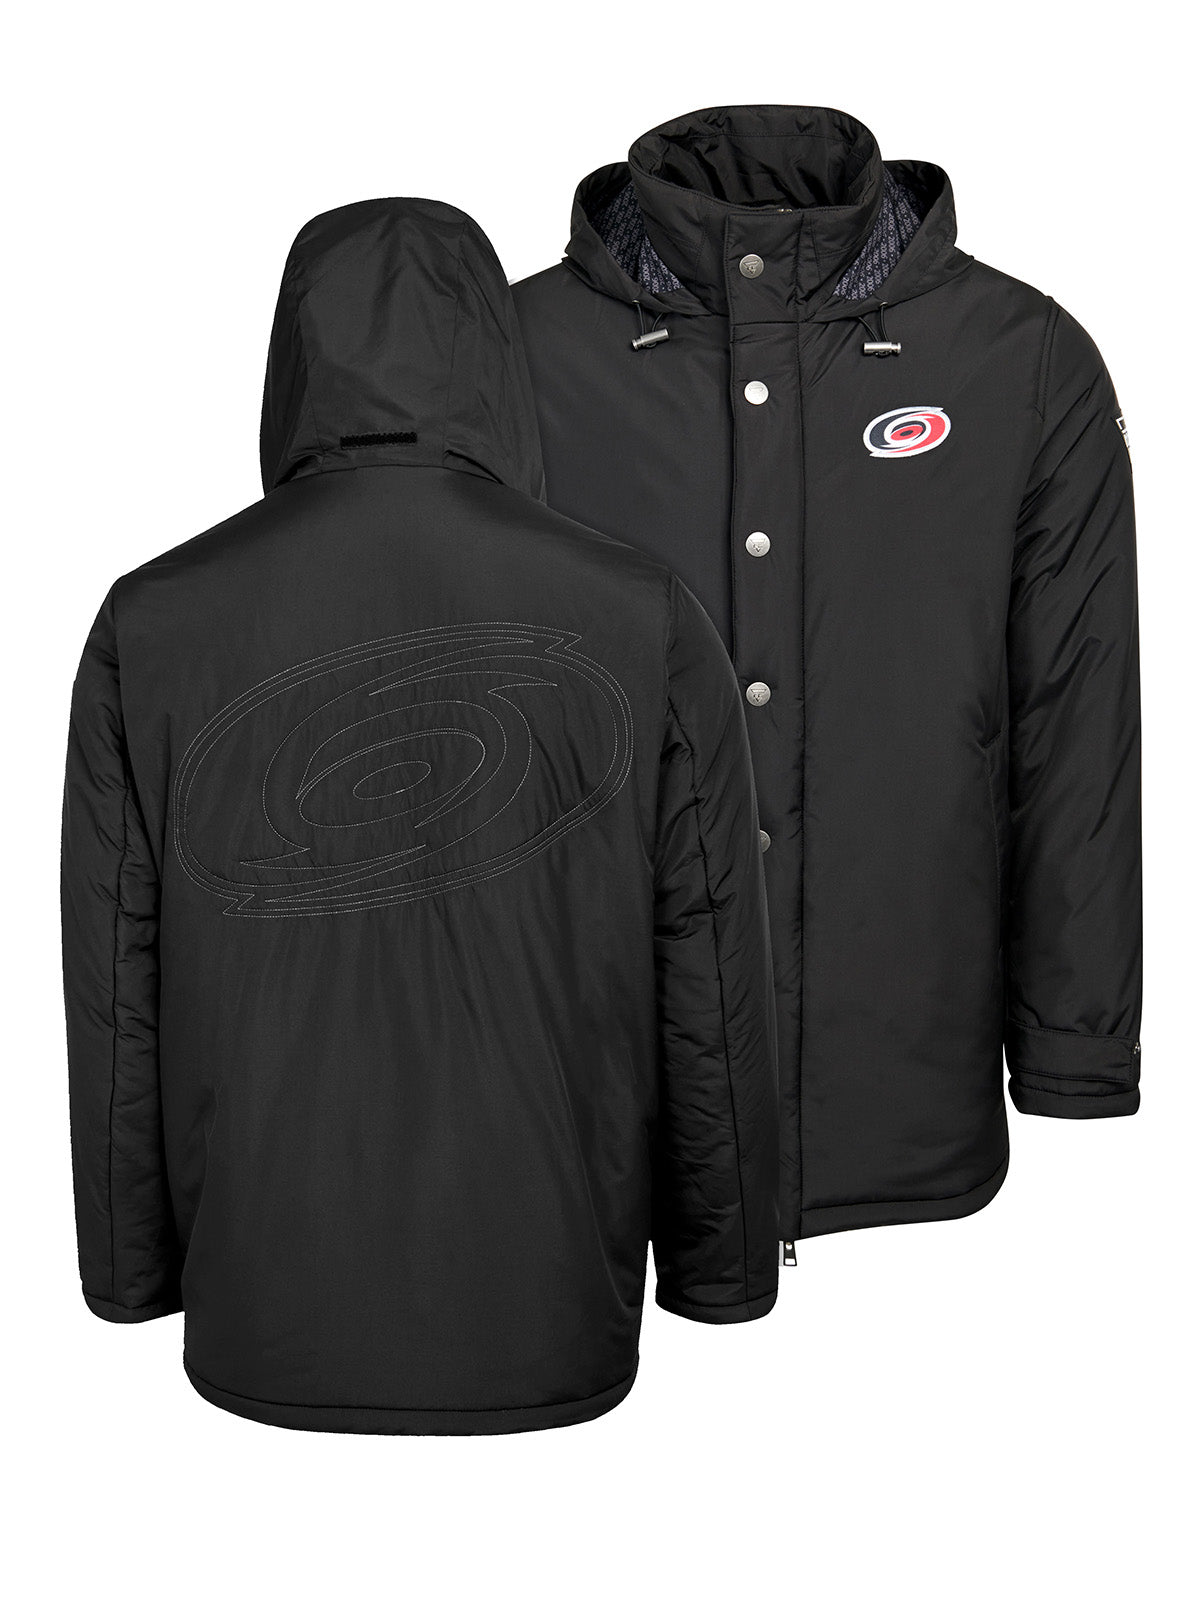 Carolina Hurricanes Coach's Jacket - The jacket features a quilted stitch of the Carolina Hurricanes logo centered on the back and has a removal hood in the team colors, elevating this NHL hockey clothing collection